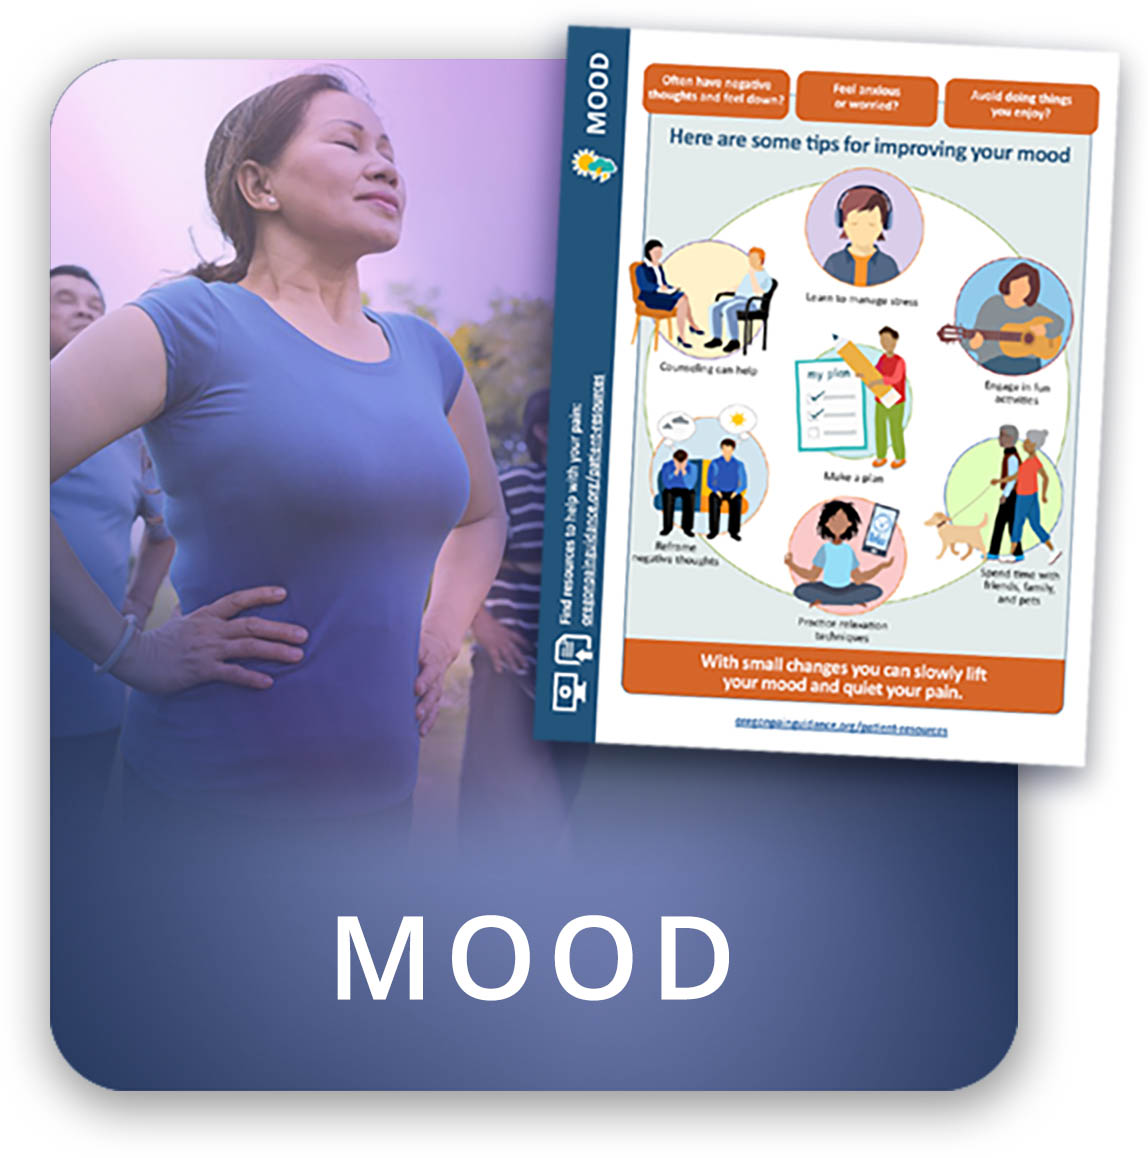 Understand the role that mood plays in your pain